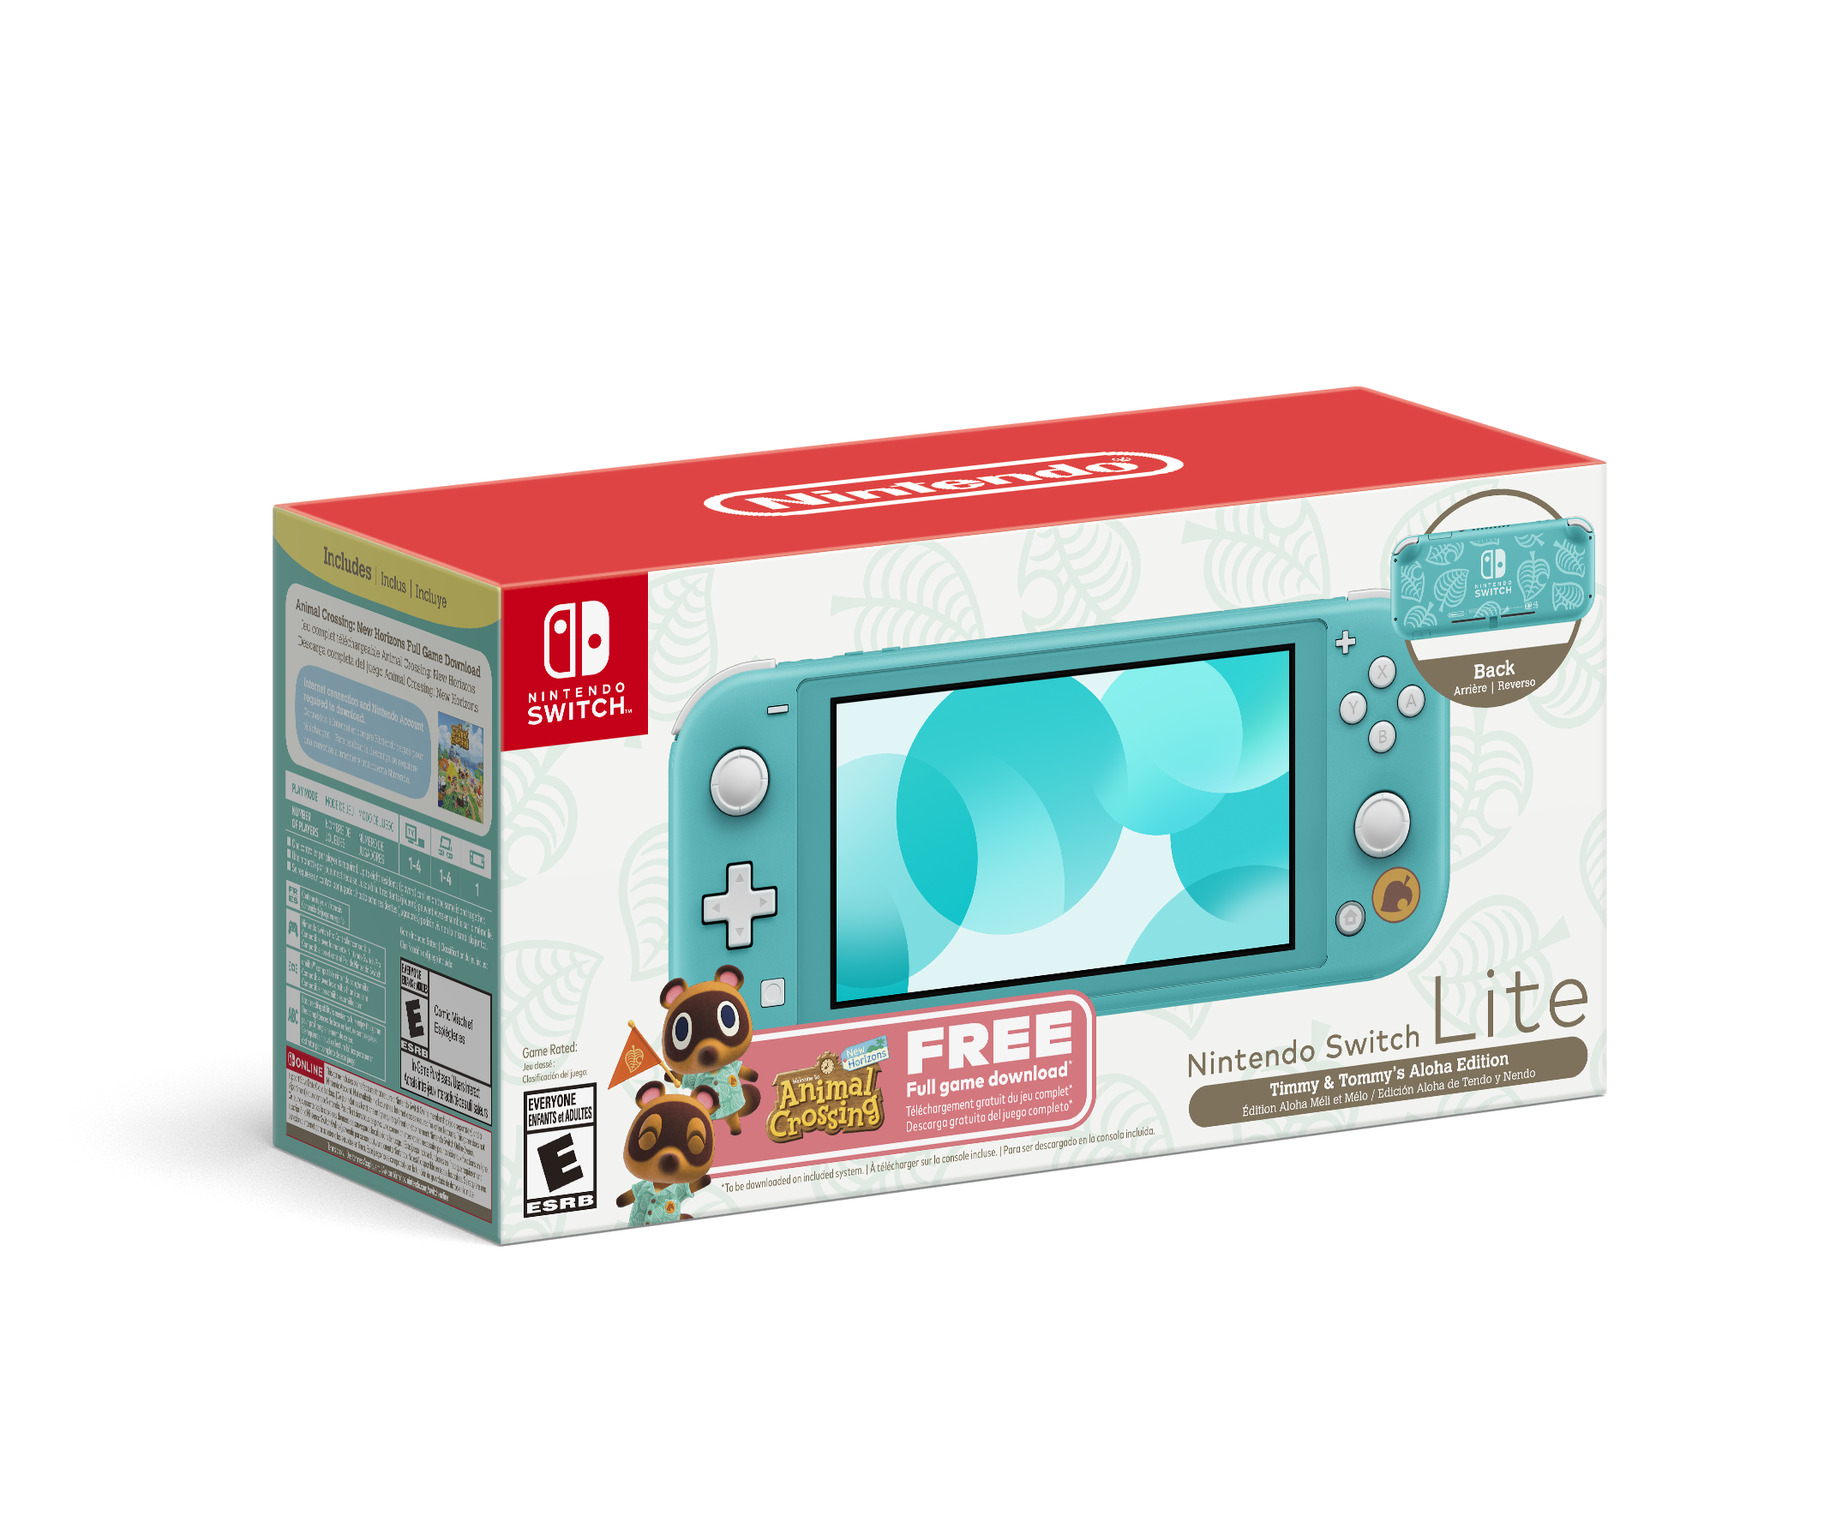 Nintendo Switch™ Lite (Timmy & Tommy’s Aloha Edition) Animal Crossing™: New Horizons Bundle (Full Game Download Included) - image 1 of 10